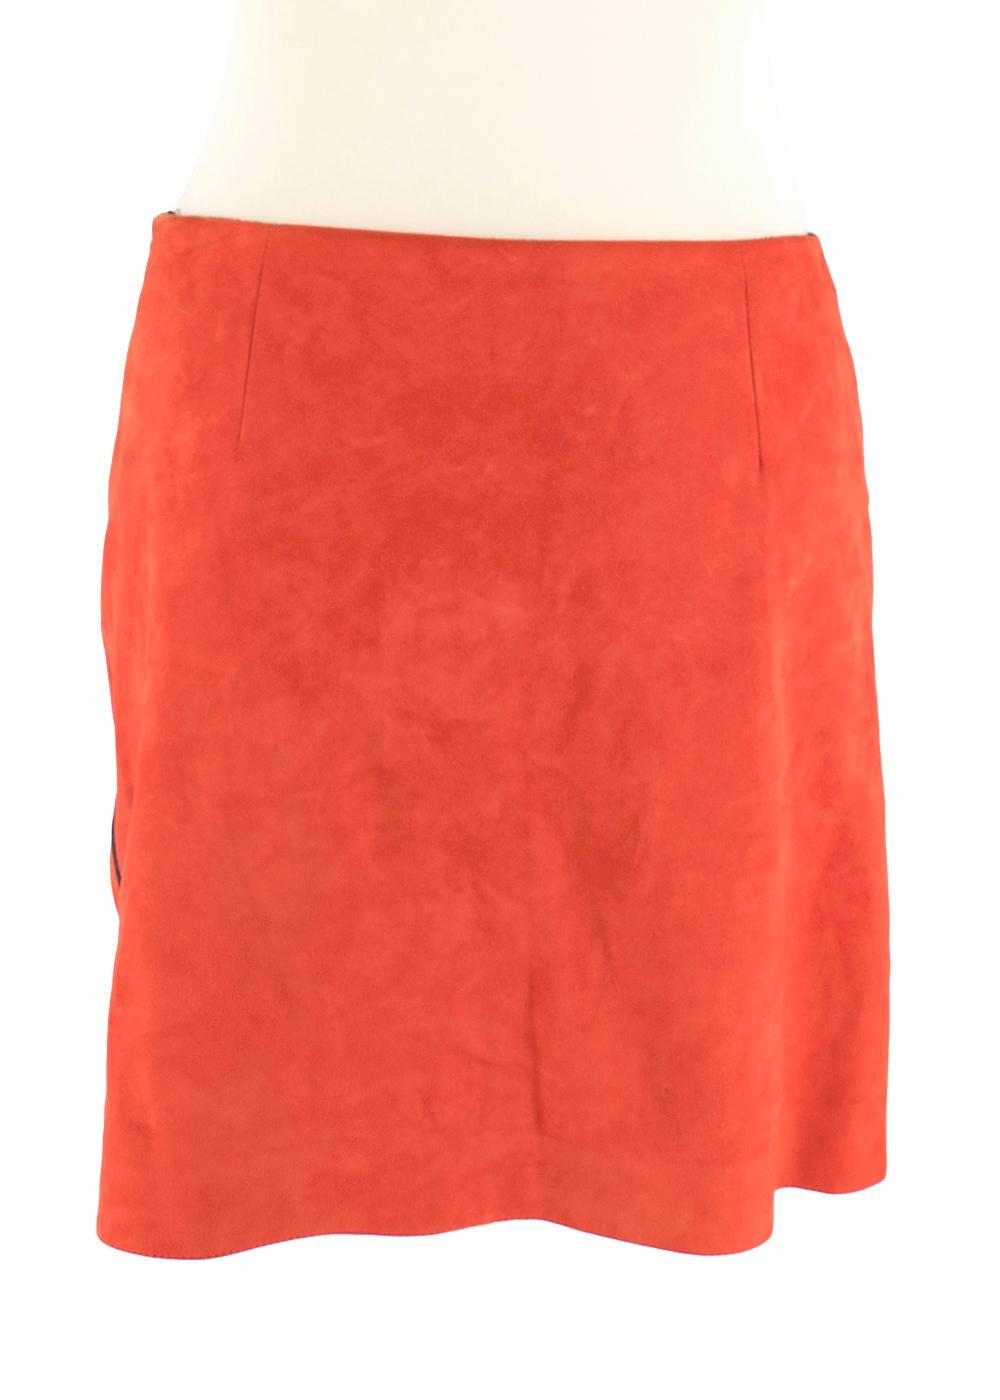 Loewe Red Suede Cyborg Mini Skirt - Size US 4 For Sale 3